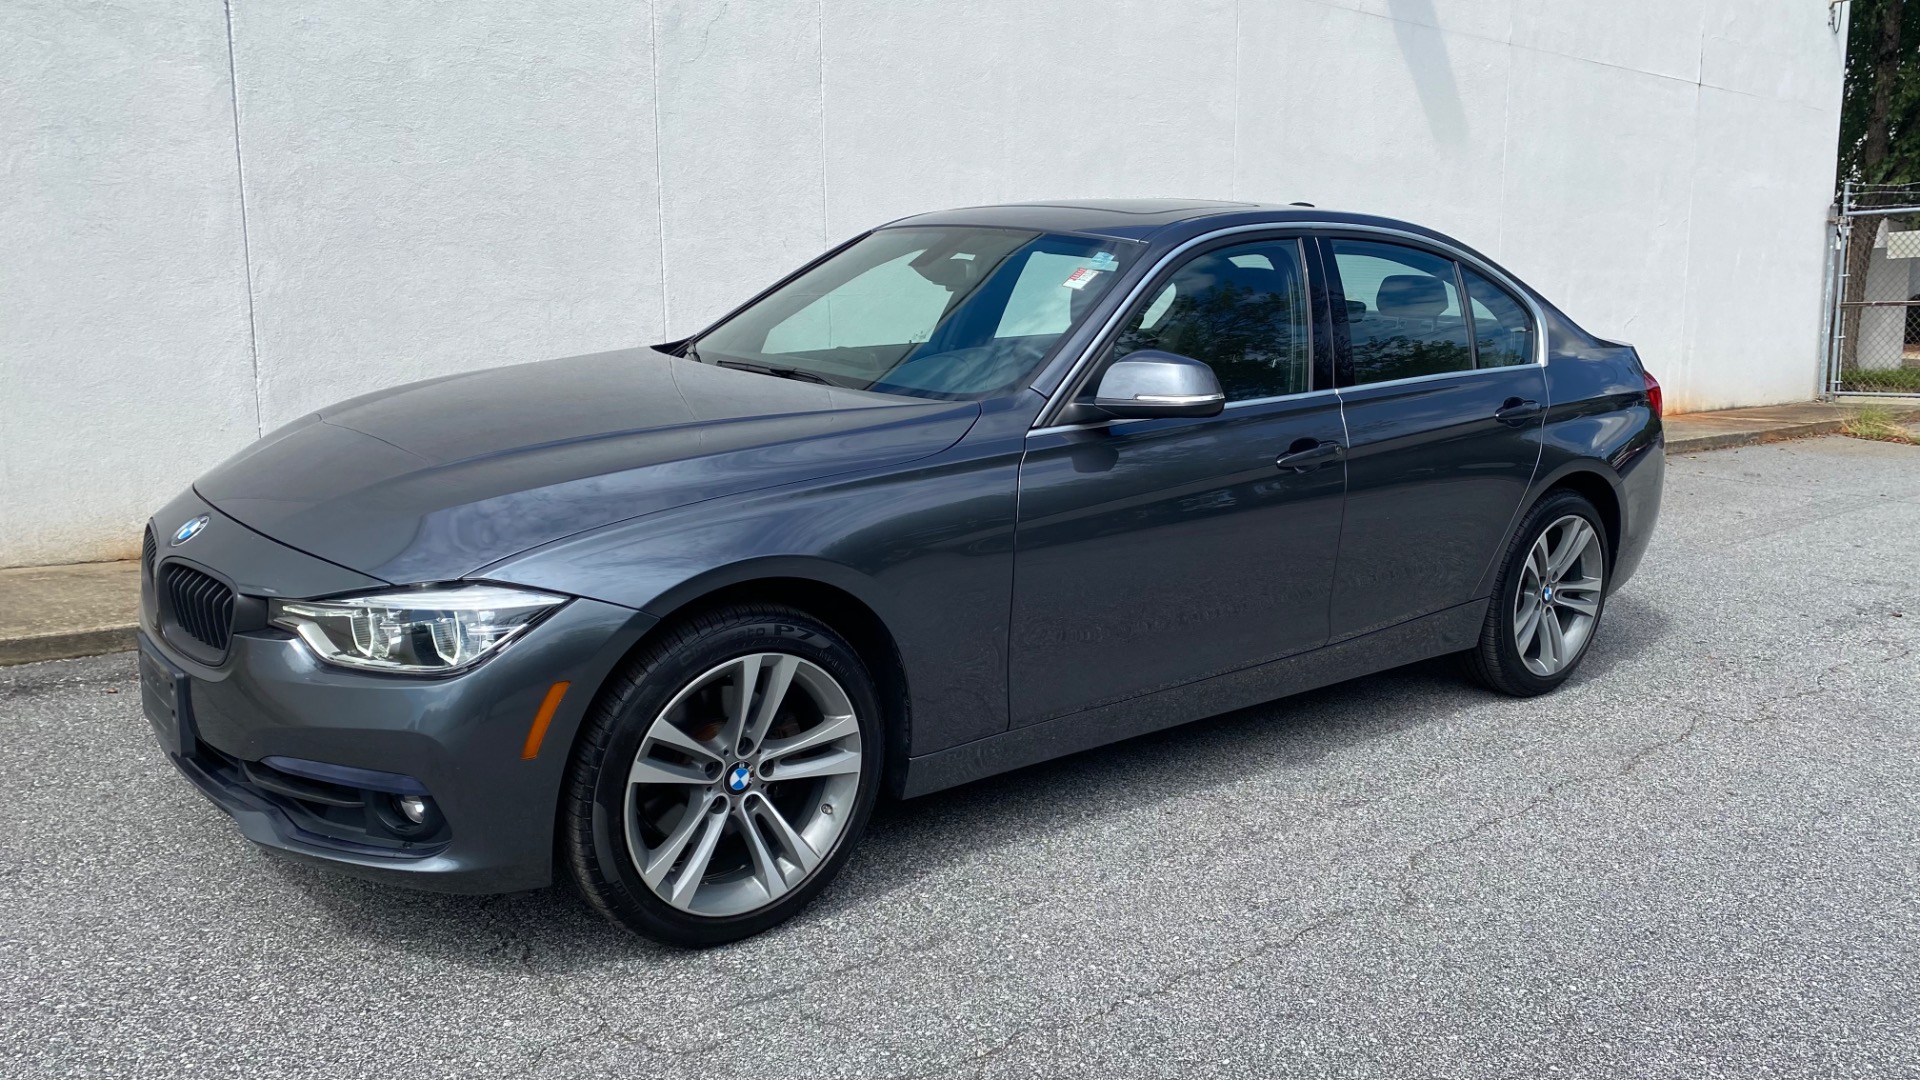 Used 2018 BMW 3 SERIES 330I XDRIVE / CONV PKG / SUNROOF / SPORT STS / HTD STS / REARVIE for sale Sold at Formula Imports in Charlotte NC 28227 3